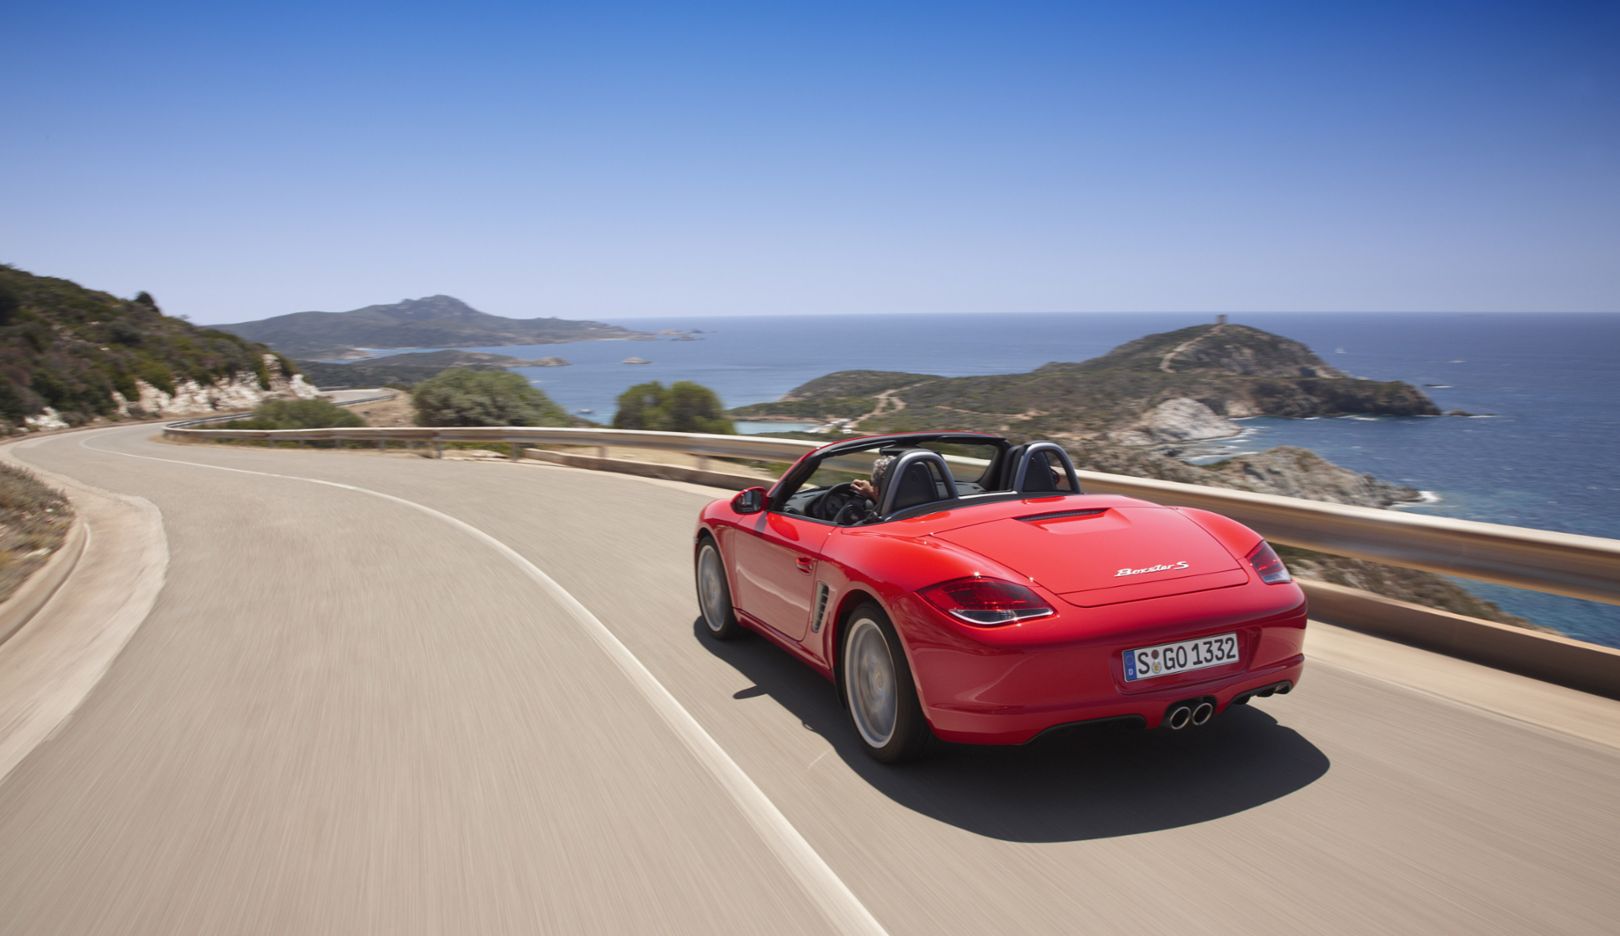 987 generation: model years 2005–2011. Over the years, the technology is fine-tuned again and again. For example, the engine output of the 987 generation Boxster increases to 188 kW (255 hp) by the end of the production period in 2011 and to 228 kW (310 hp) for the Boxster S.